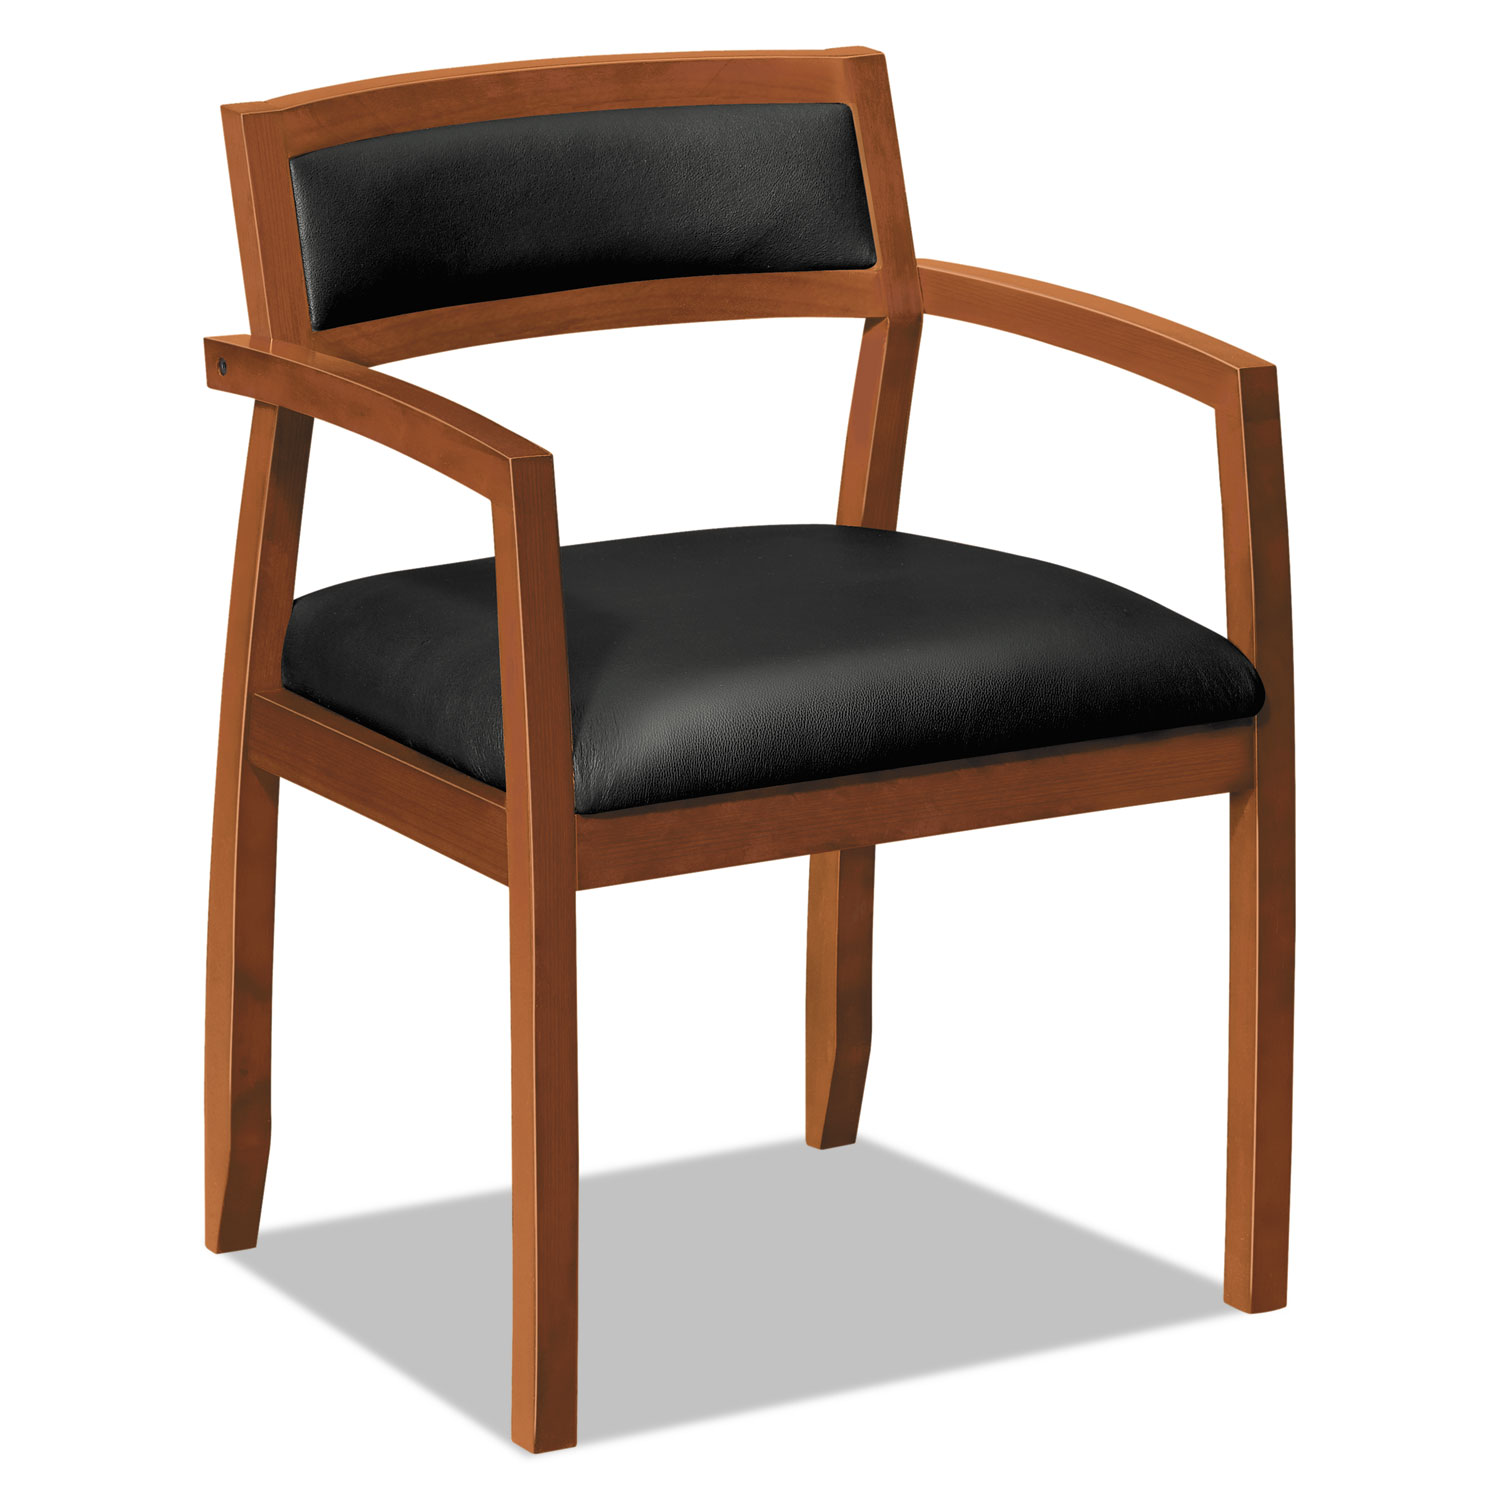 VL850 Series Wood Guest Chairs with Black Leather Seat/Back, Bourbon Cherry